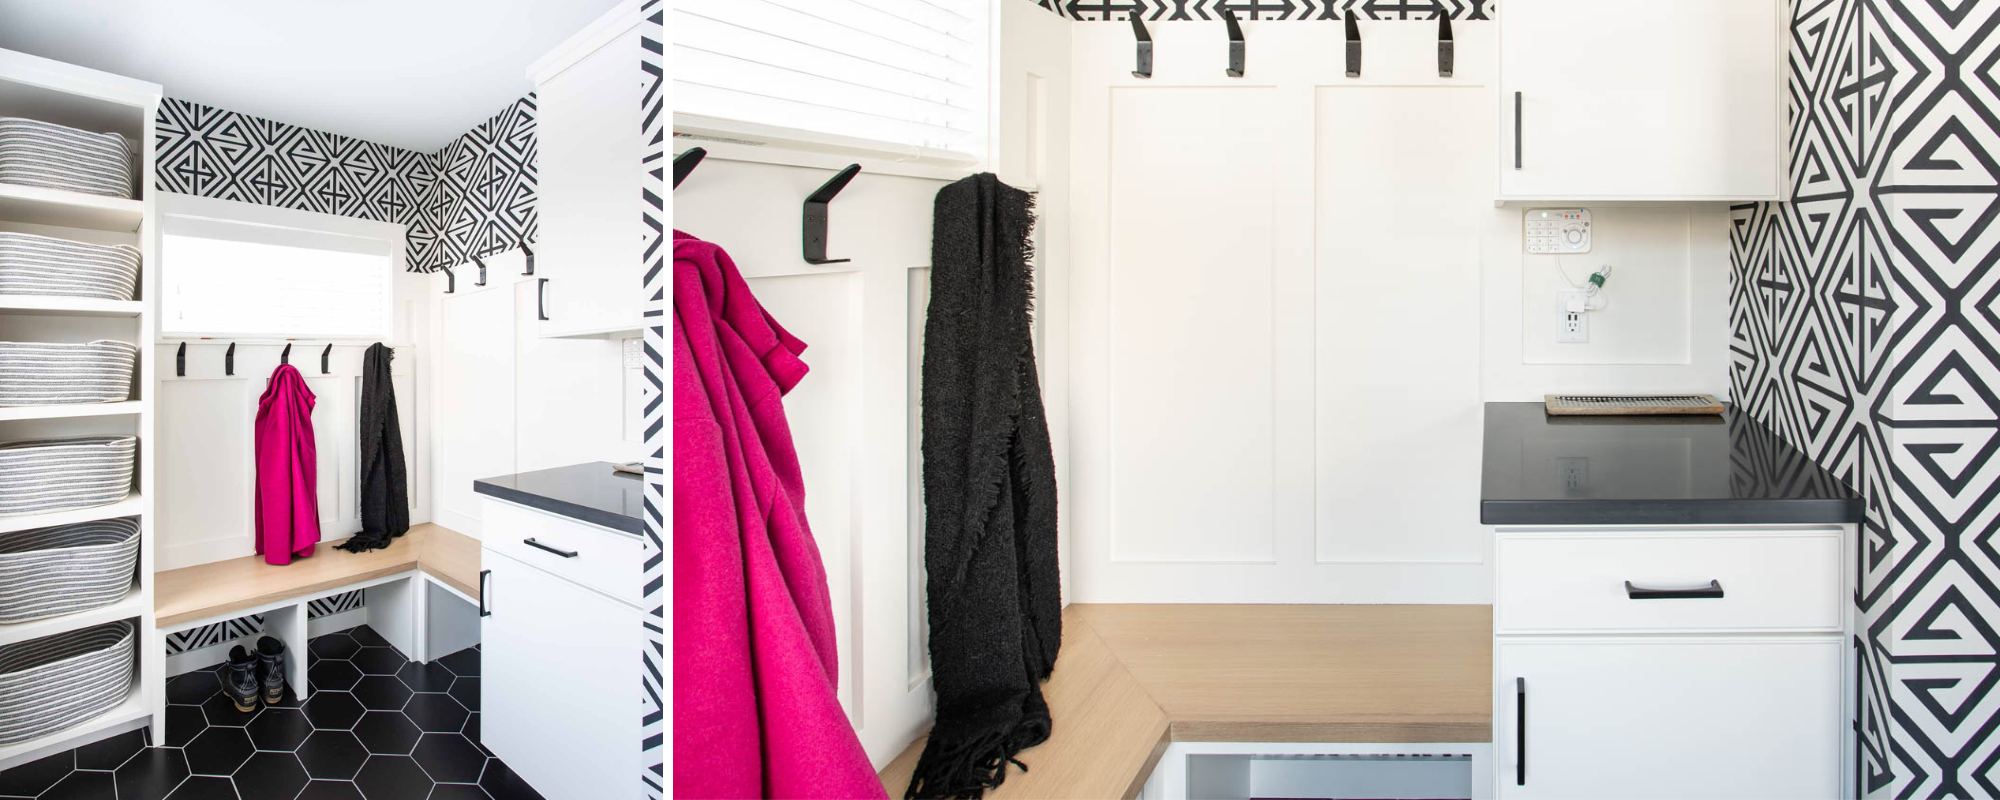 Our Functional Mudroom Reveal with Picture Frame Moulding - Marly Dice